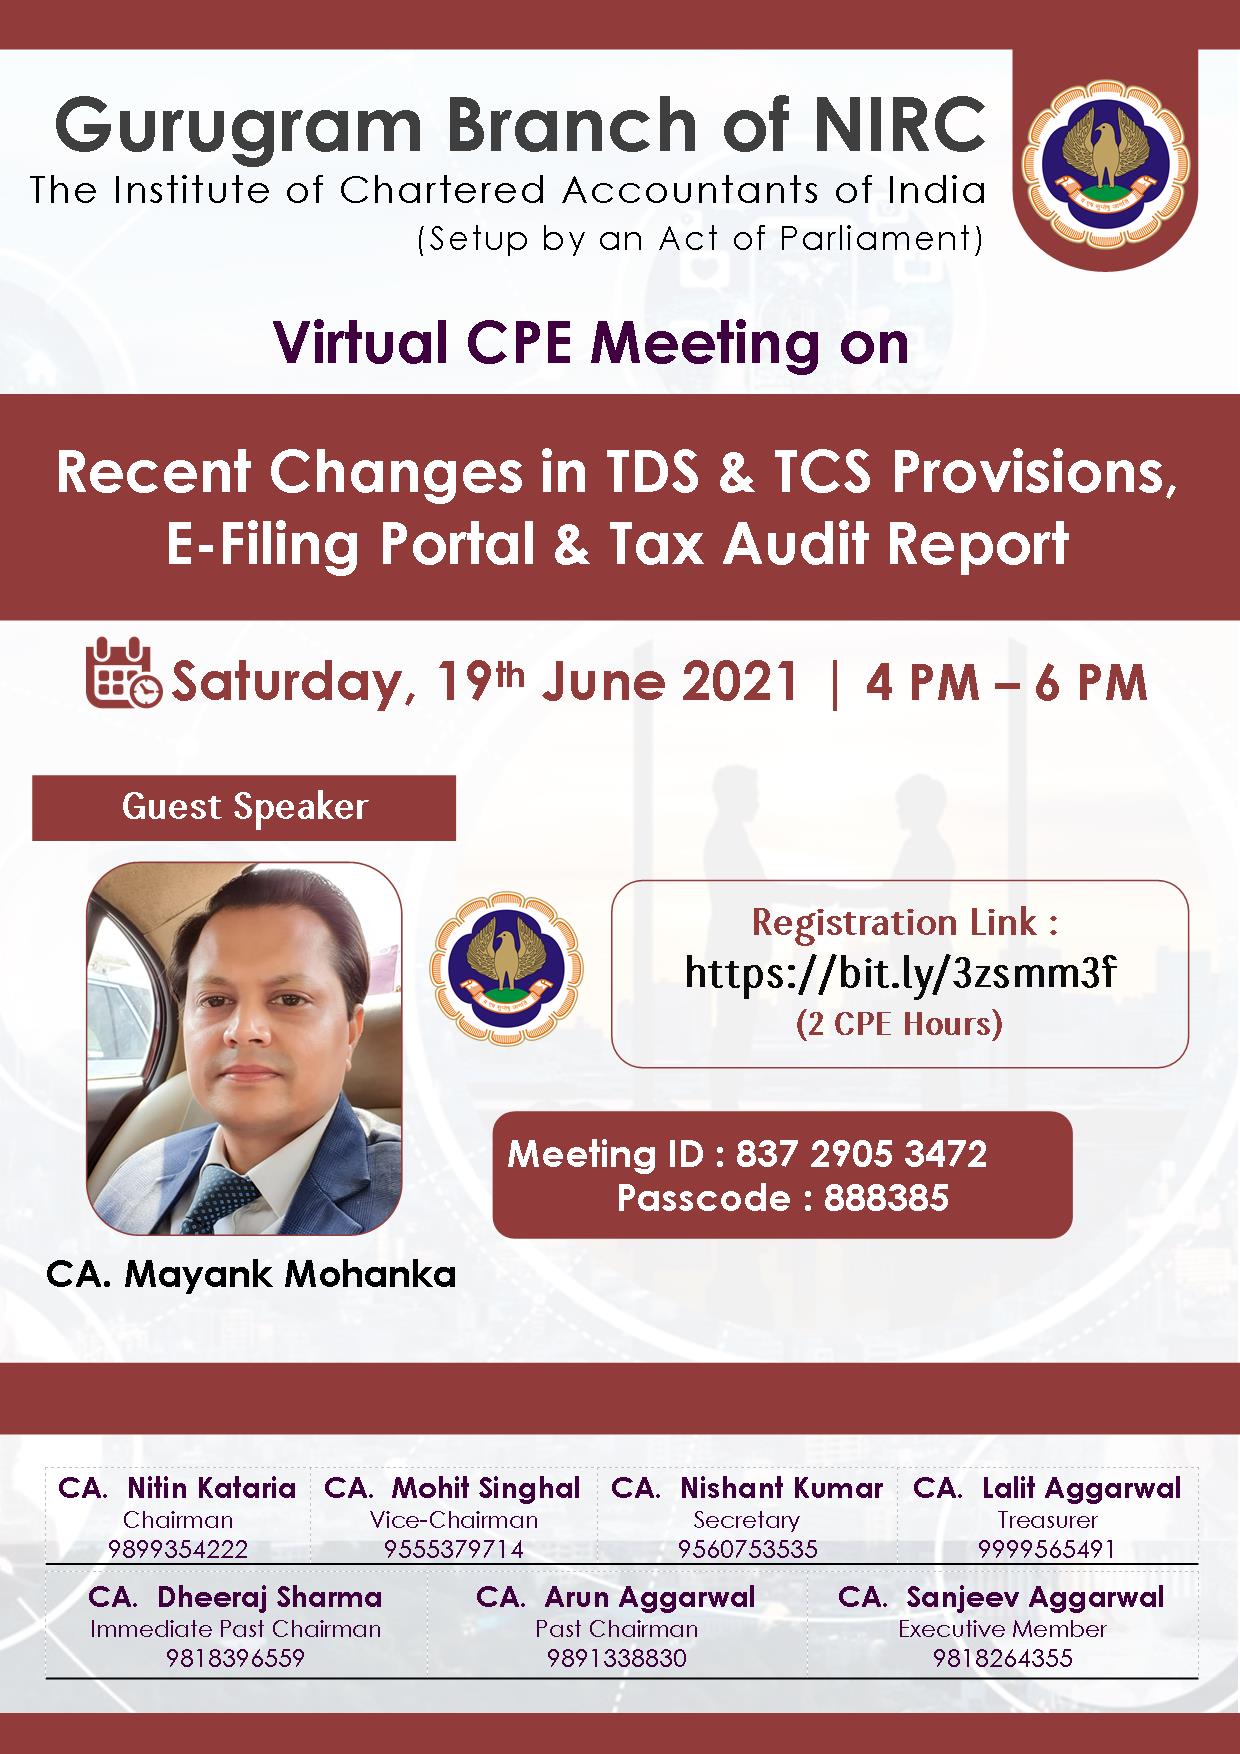 VCM on Recent Changes in TDS & TCS Provisions, E-Filing Portal & Tax Audit Report